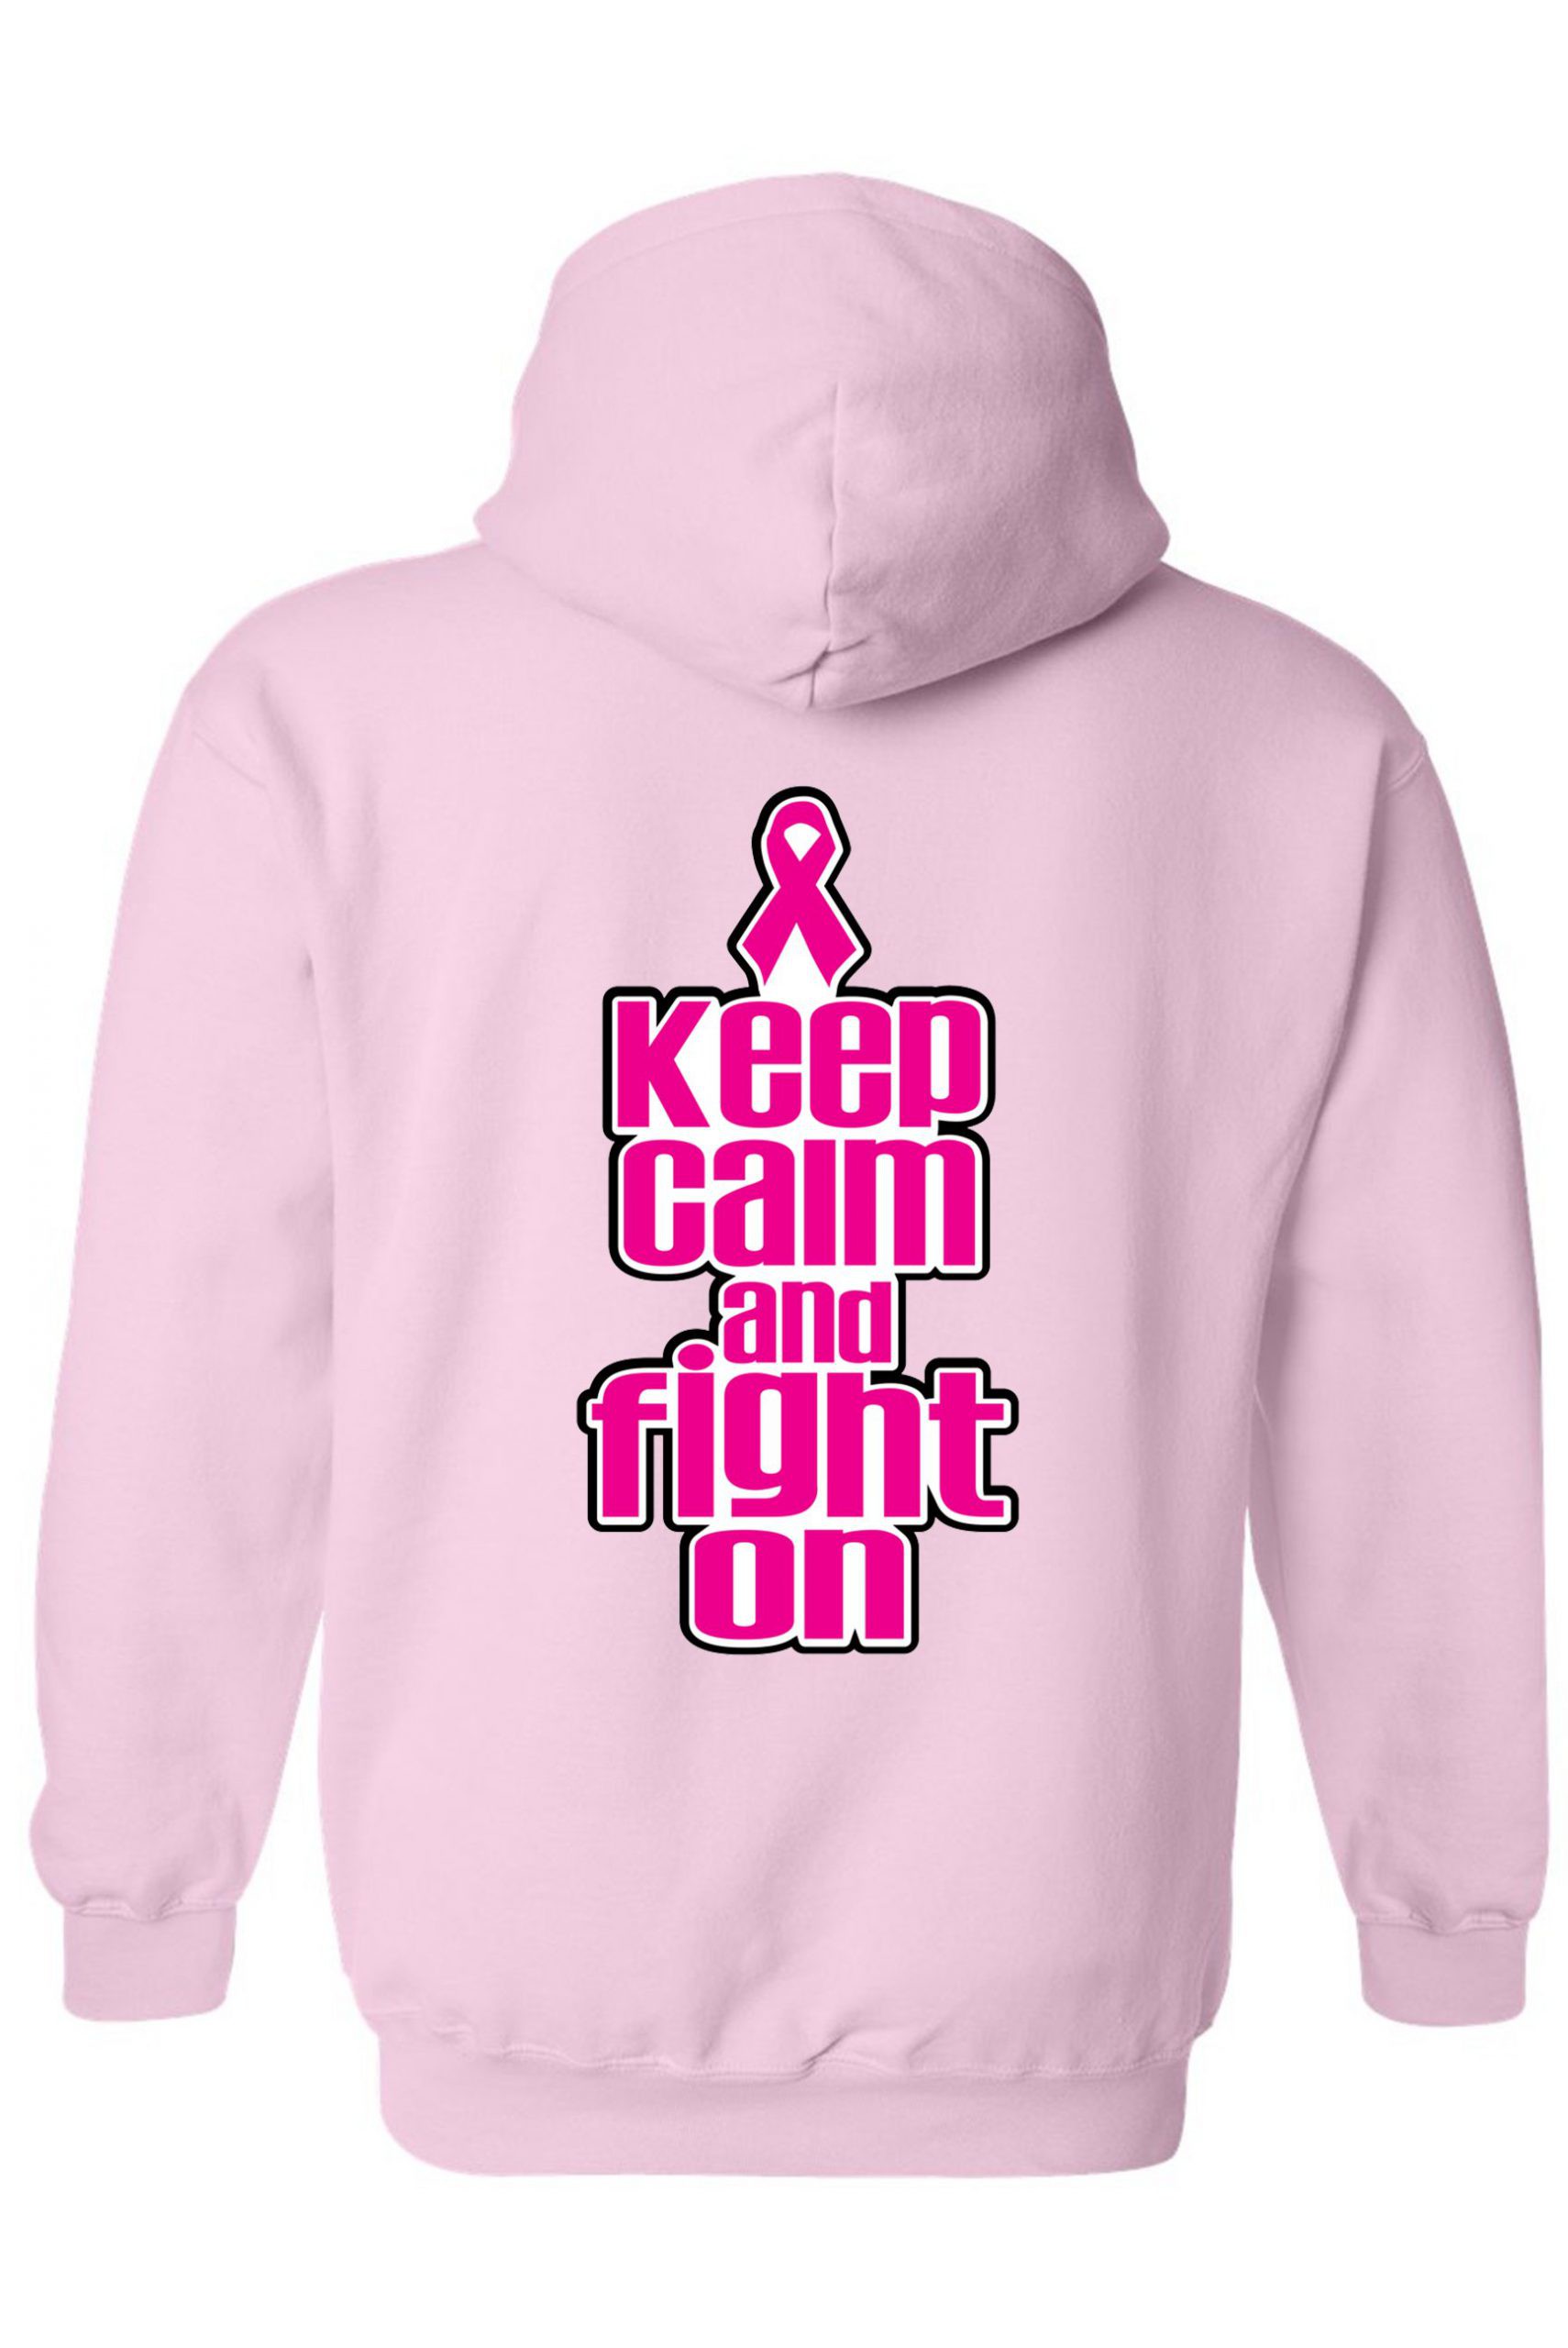 Unisex Zip-Up Hoodie  BCA "Keep Calm and Fight on"